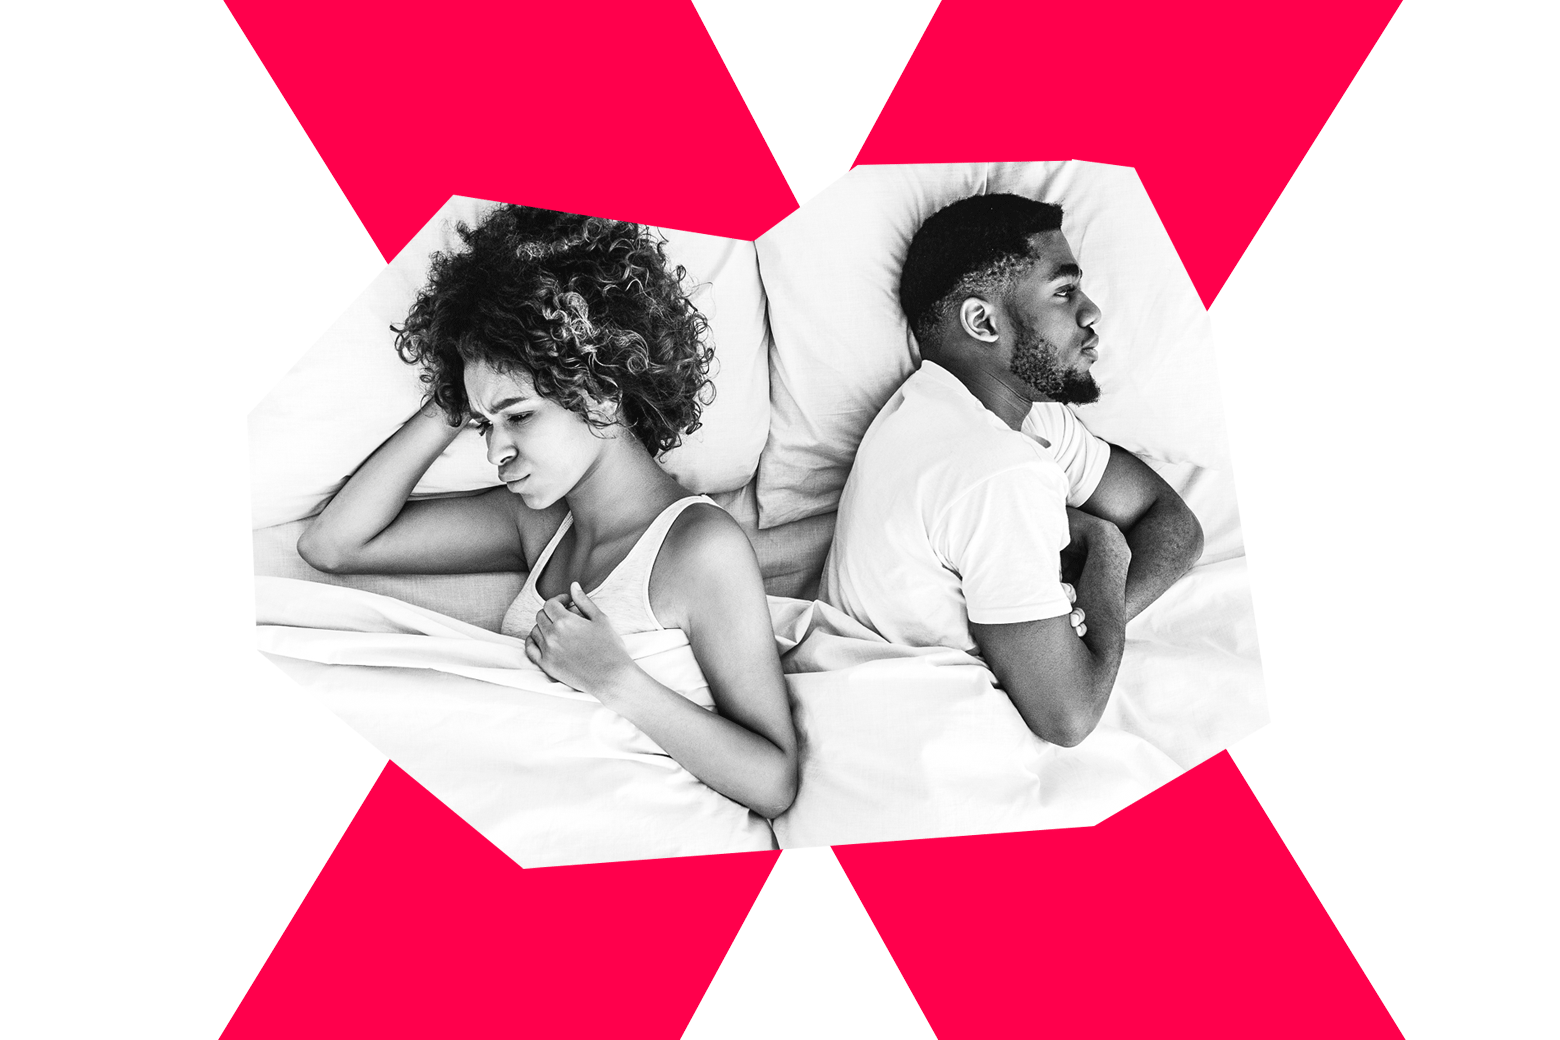 Dear Prudence My husband is on a sex image